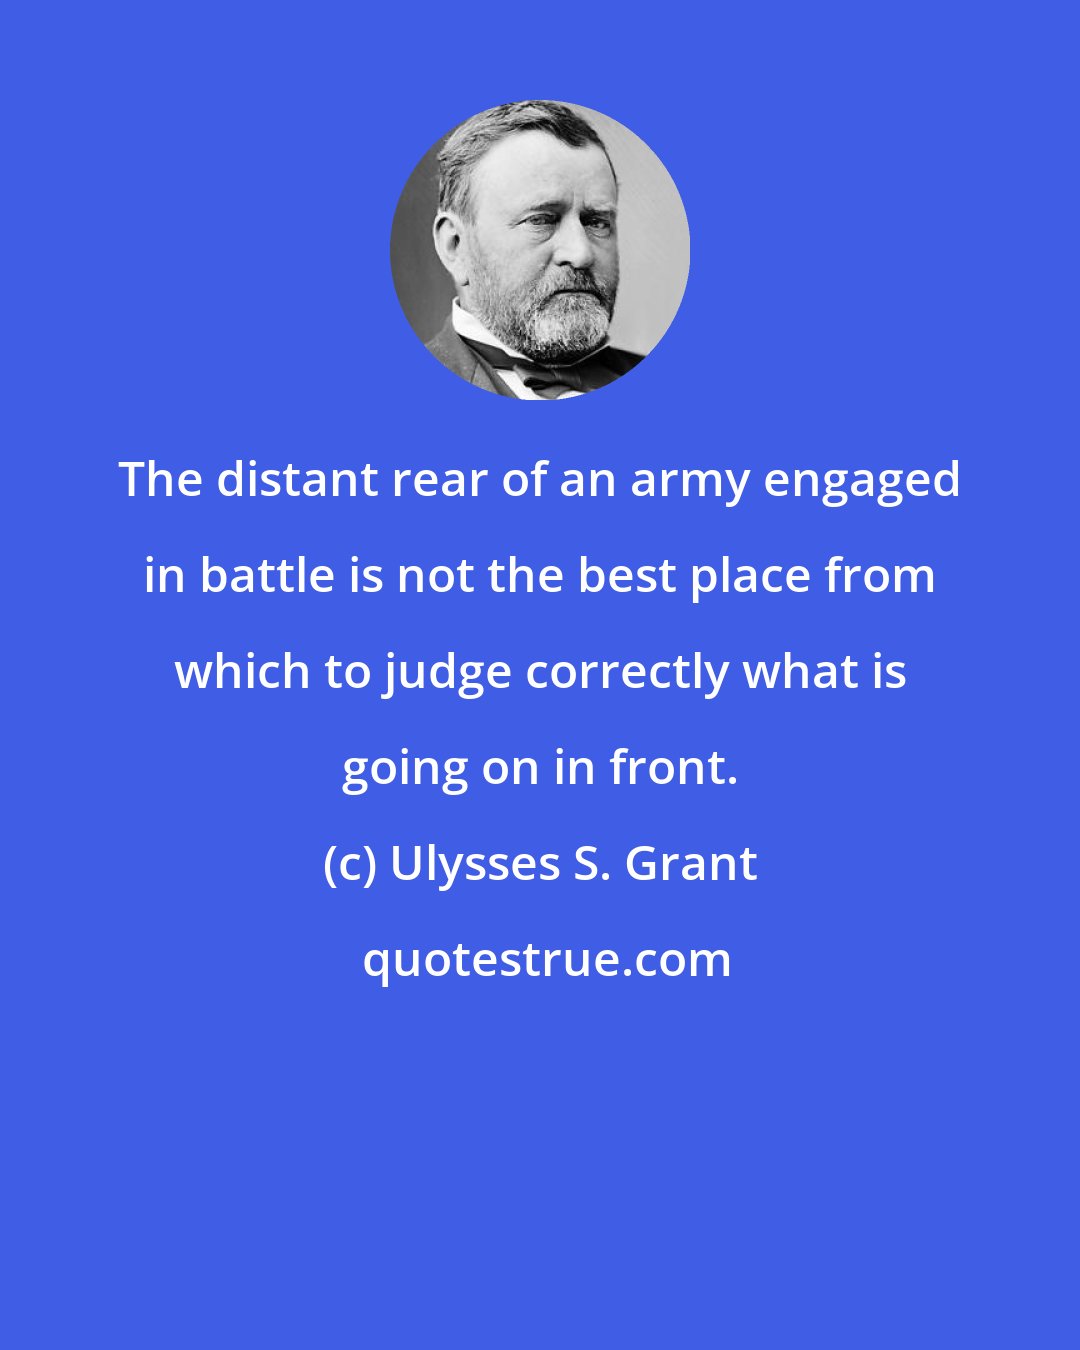 Ulysses S. Grant: The distant rear of an army engaged in battle is not the best place from which to judge correctly what is going on in front.